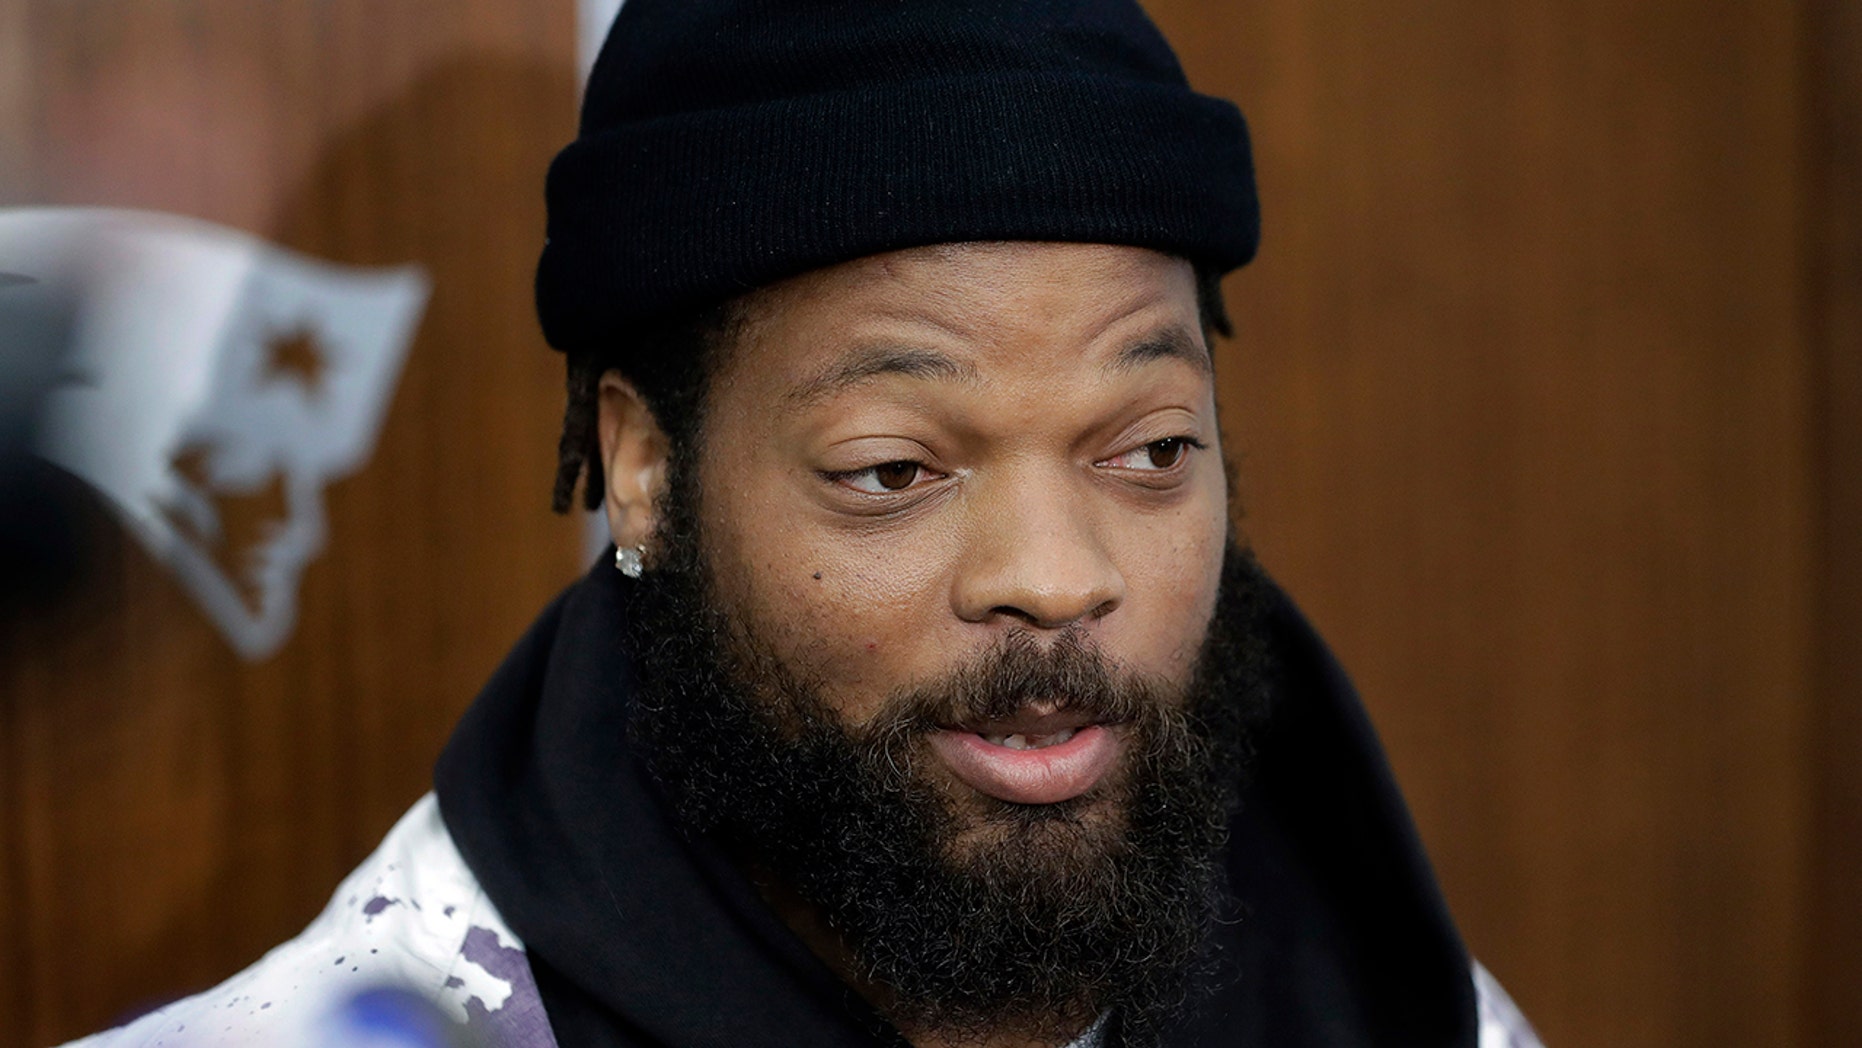 New England Patriots defensive lineman Michael Bennett speaks with members of the media in the team's locker room following NFL football practice, Wednesday, Oct. 23, 2019, in Foxborough, Mass. (AP Photo/Steven Senne)